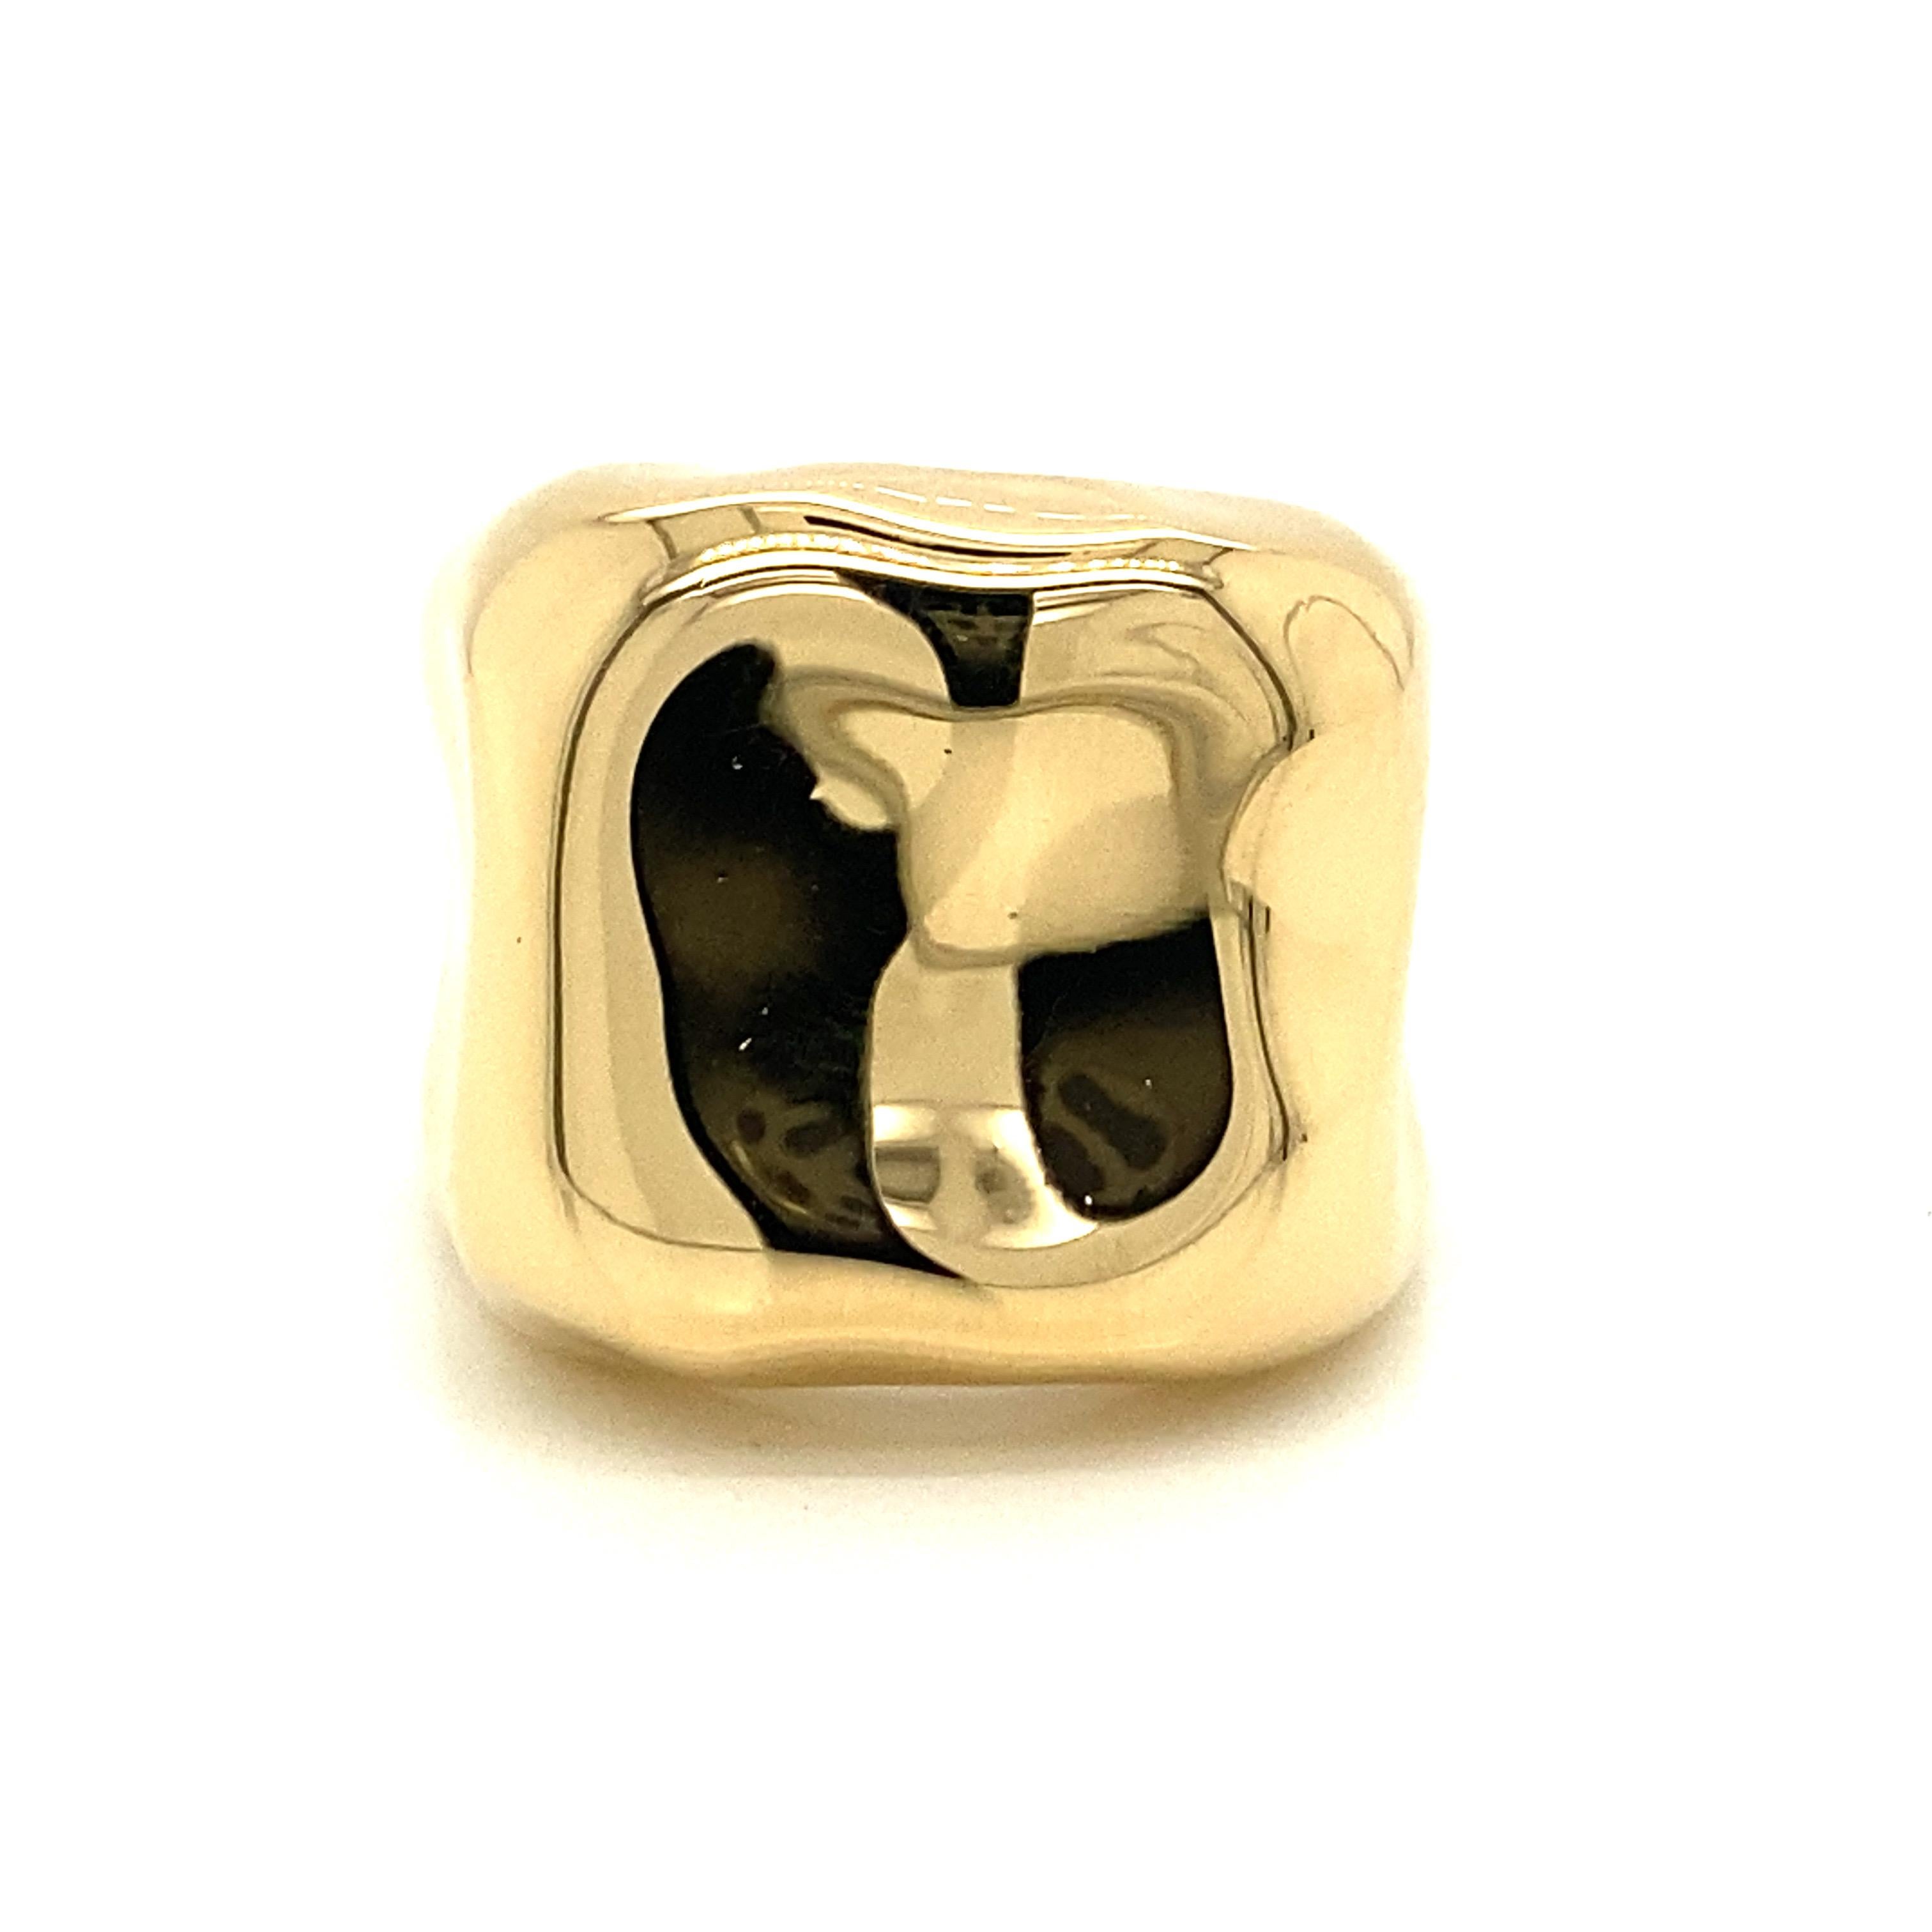 Dior Nougat Ring in 18K Yellow Gold.  The Ring measures 11/16 inch in width.  Ring size 5 1/2.  14.15 grams. Stamped: DIOR 750 B9163 49.